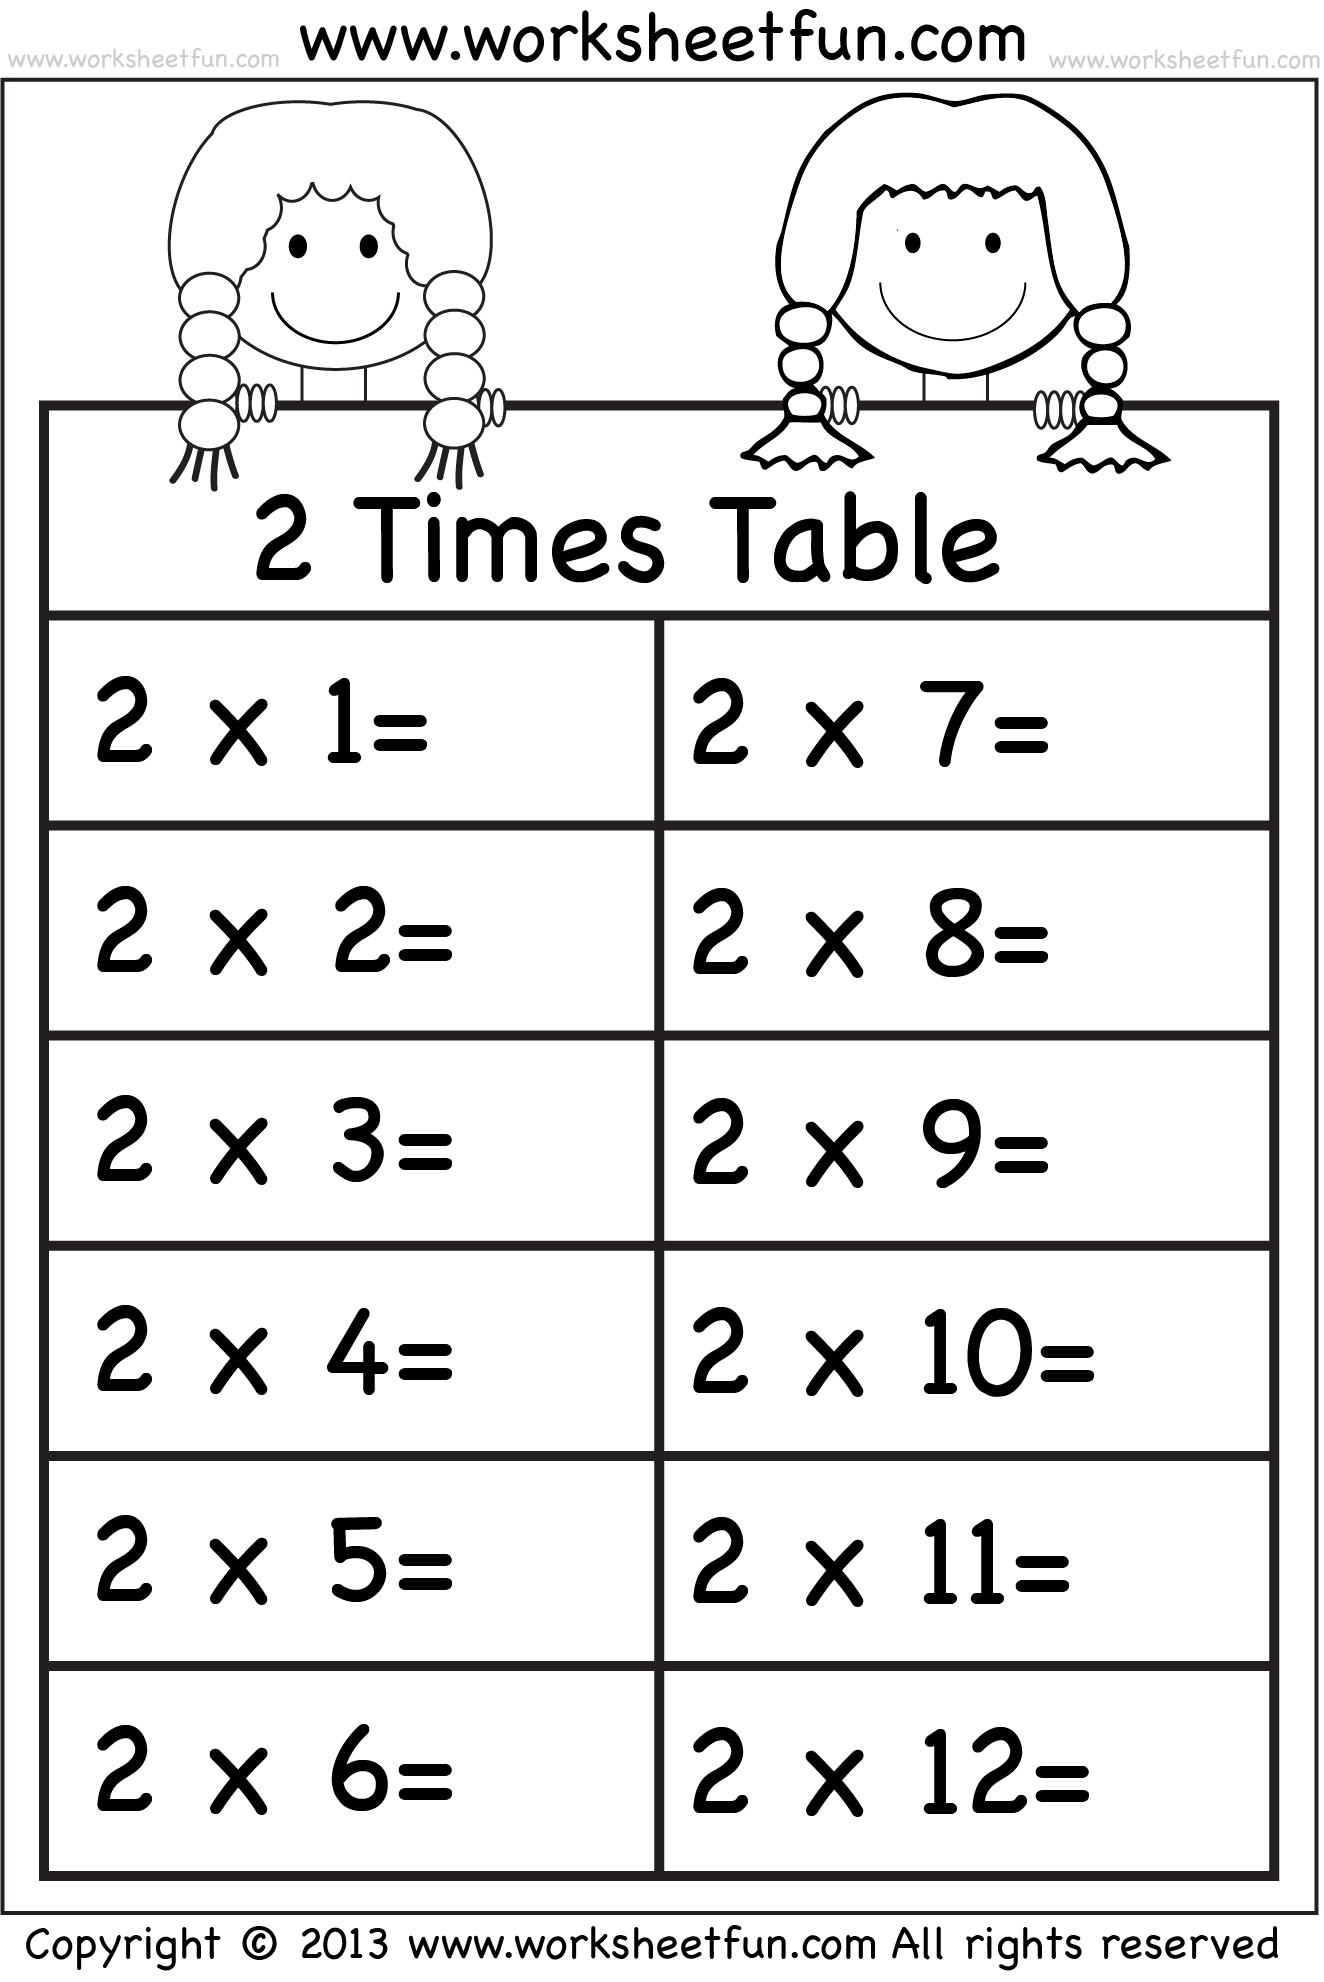 Times Tables Worksheets – 11, 11, 11, 11, 11, 11, 11, 11, 11, 11 and 111 Within 2 Times Table Worksheet